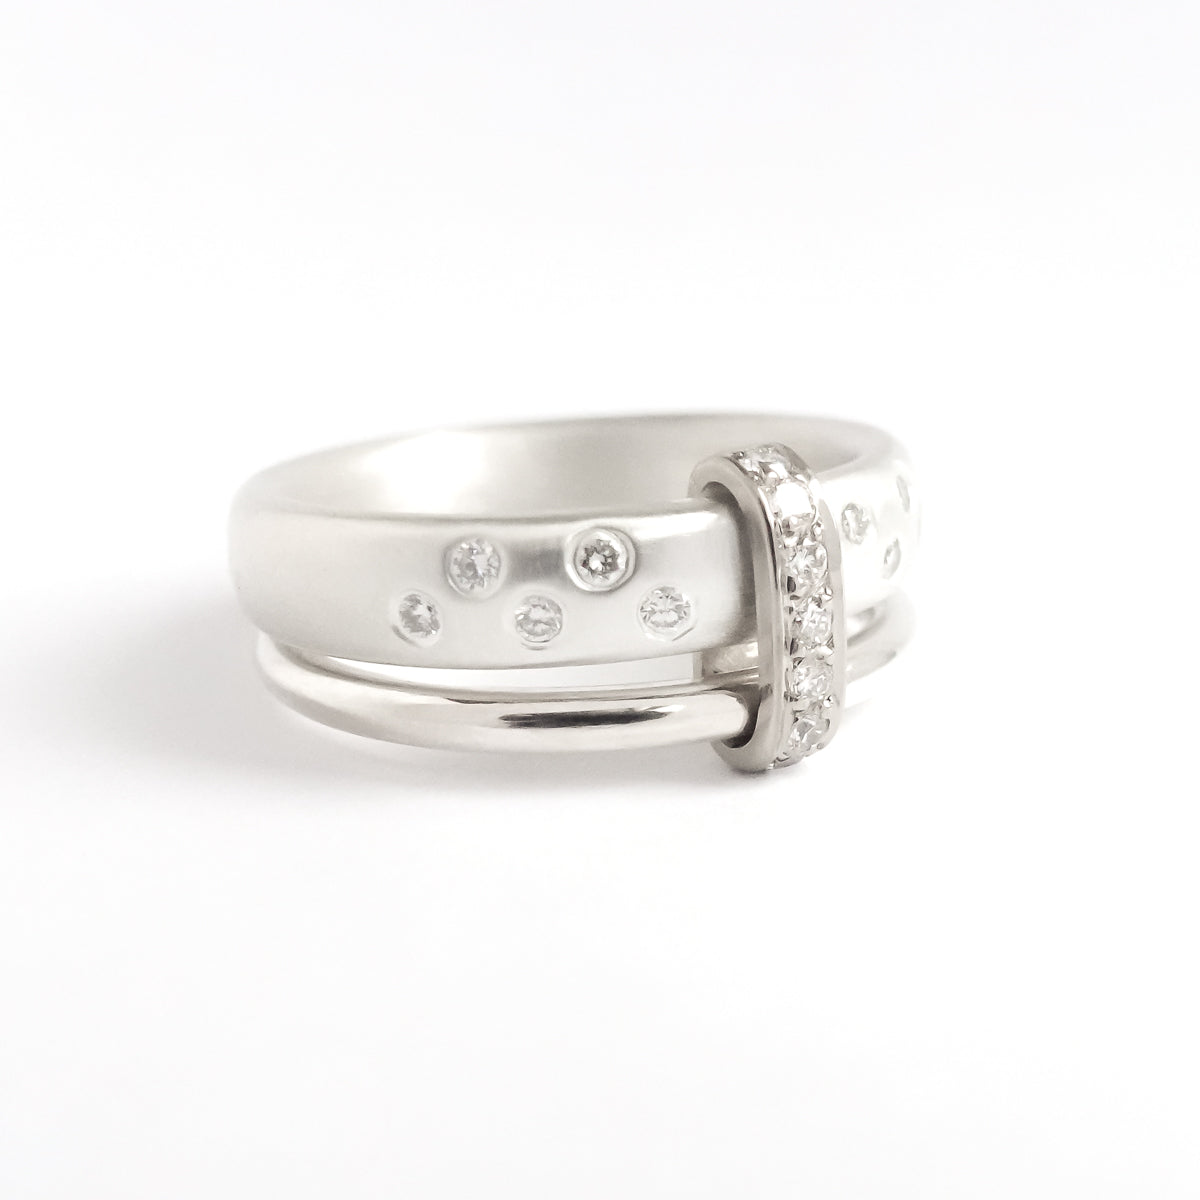 Modern contemporary silver and diamond ring. Beautiful dress ring or bespoke eternity ring. Sue Lane.